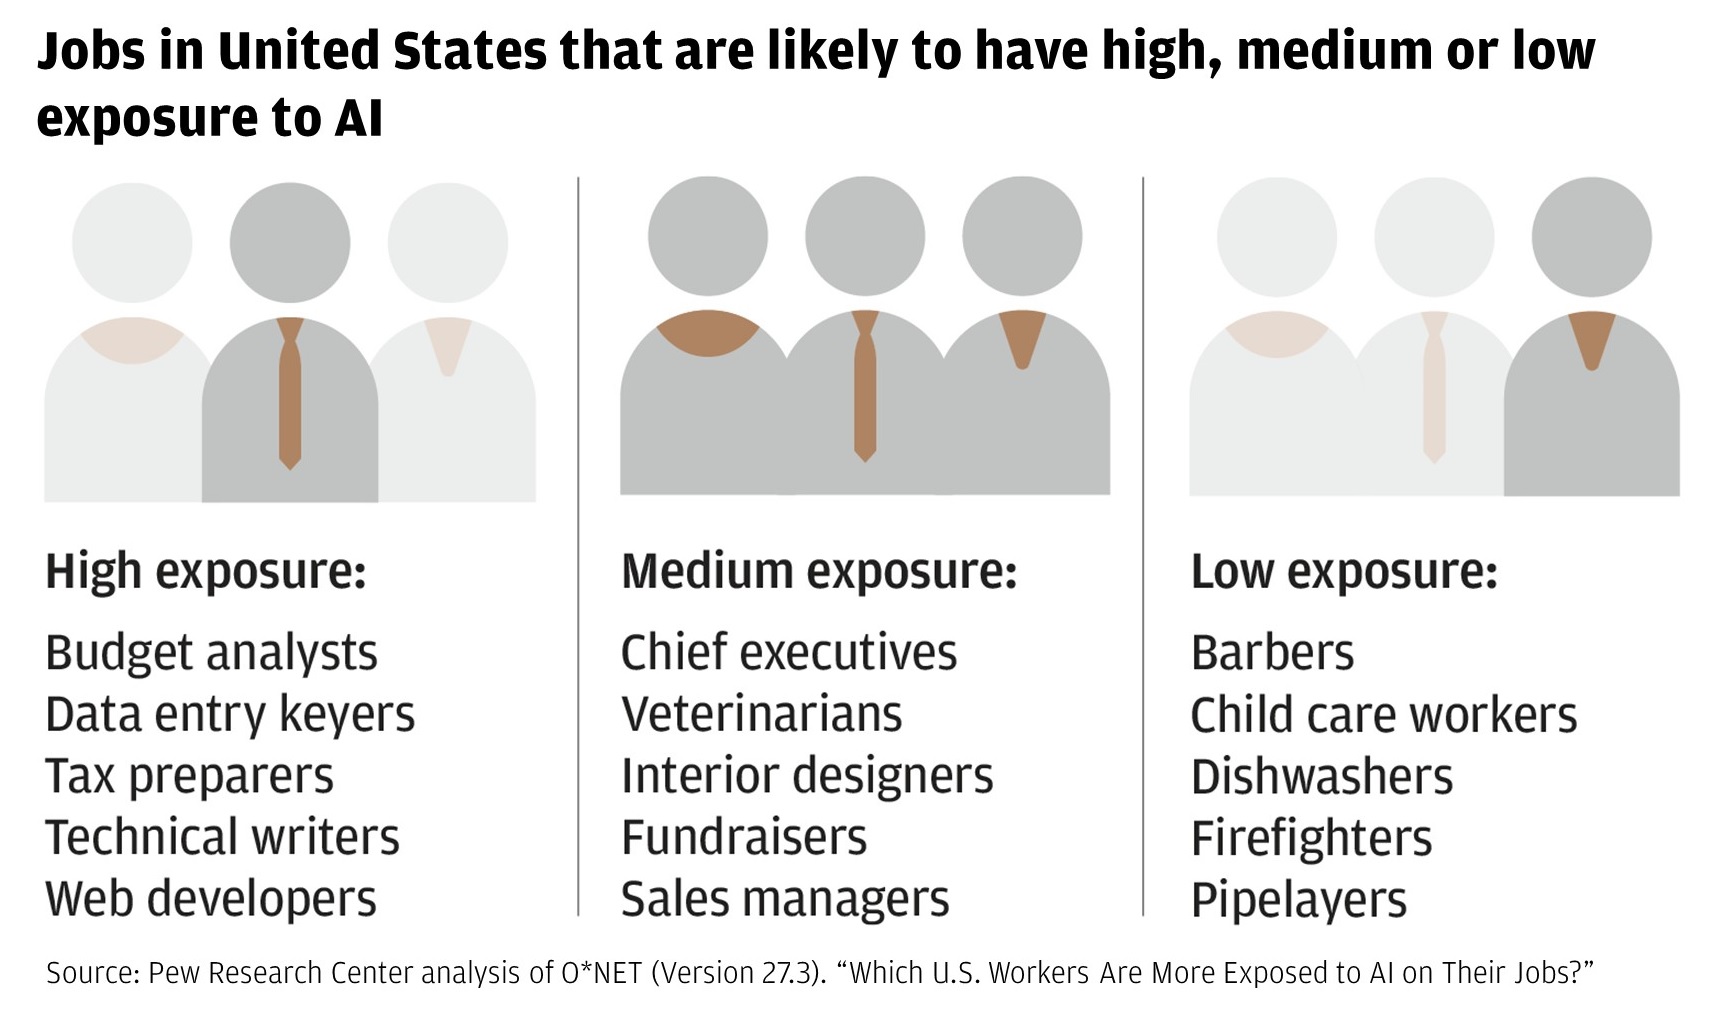 Diagram describes jobs in the United States that are likely to have high, medium or low exposure to AI.